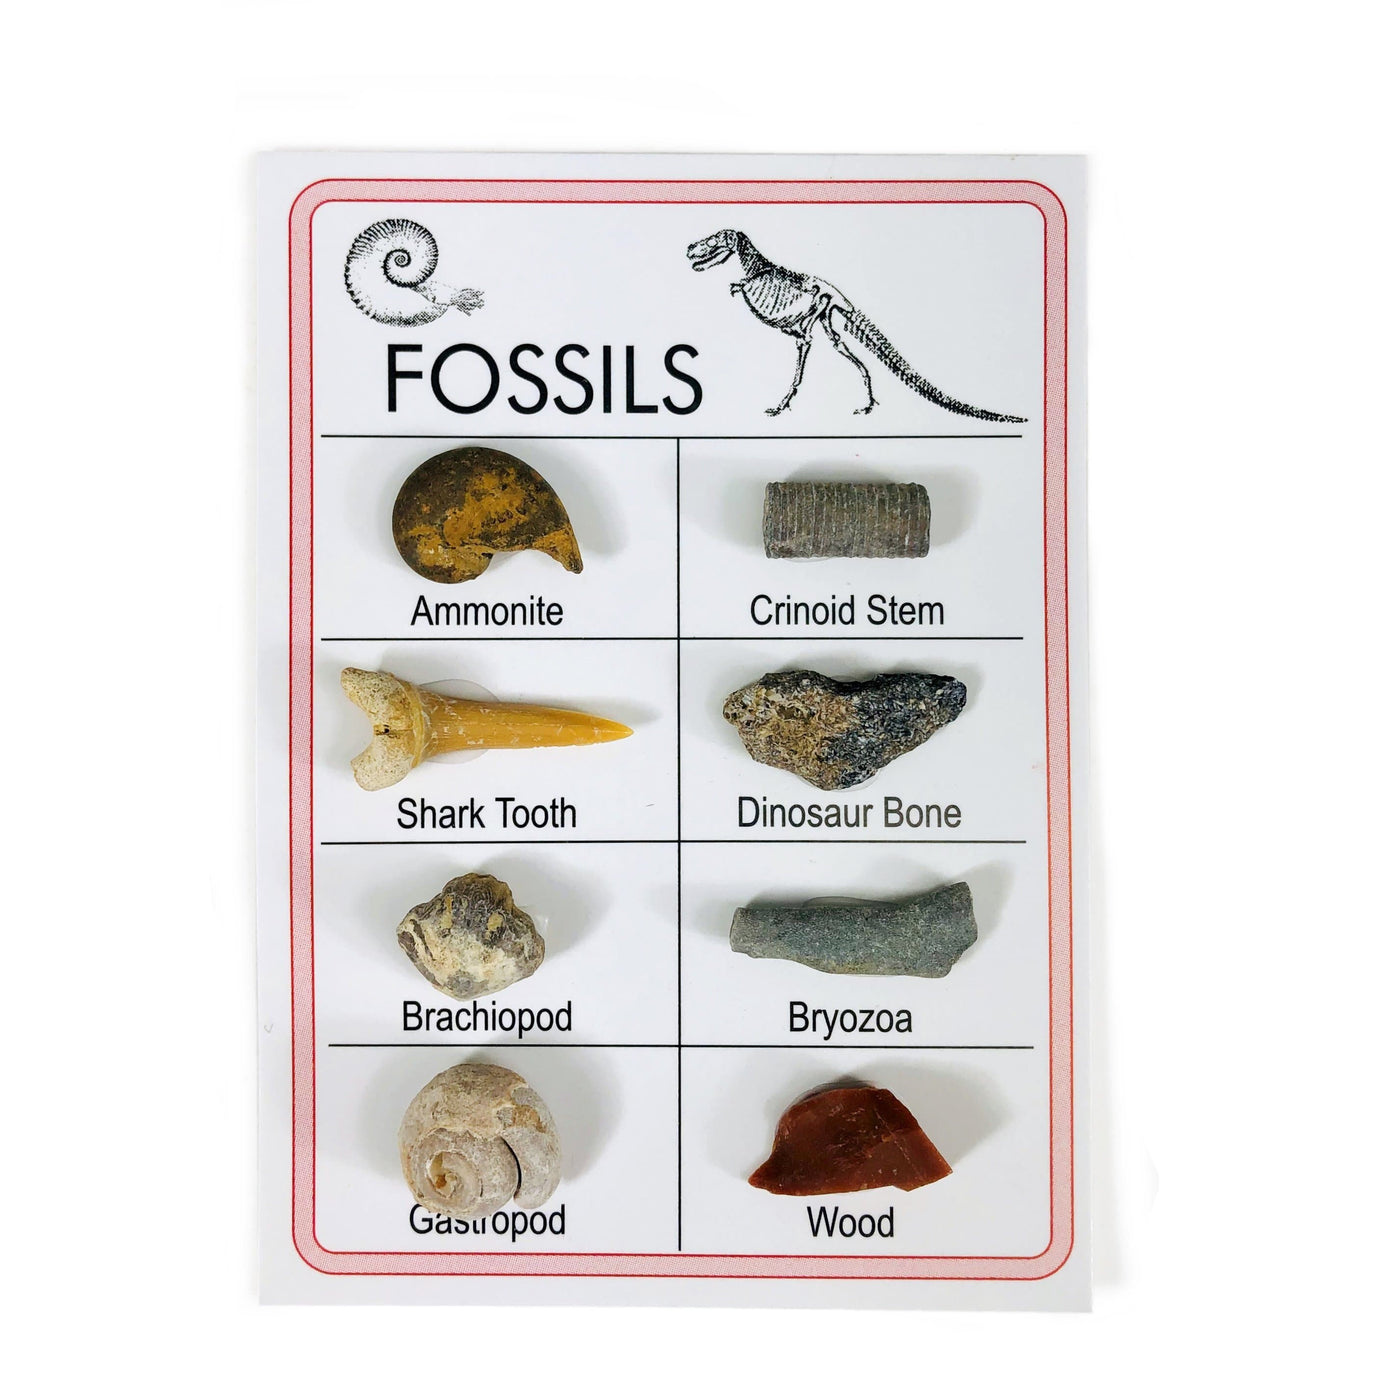 Fossil Specimen Cards - Variety of Fossils on it, showing names of each